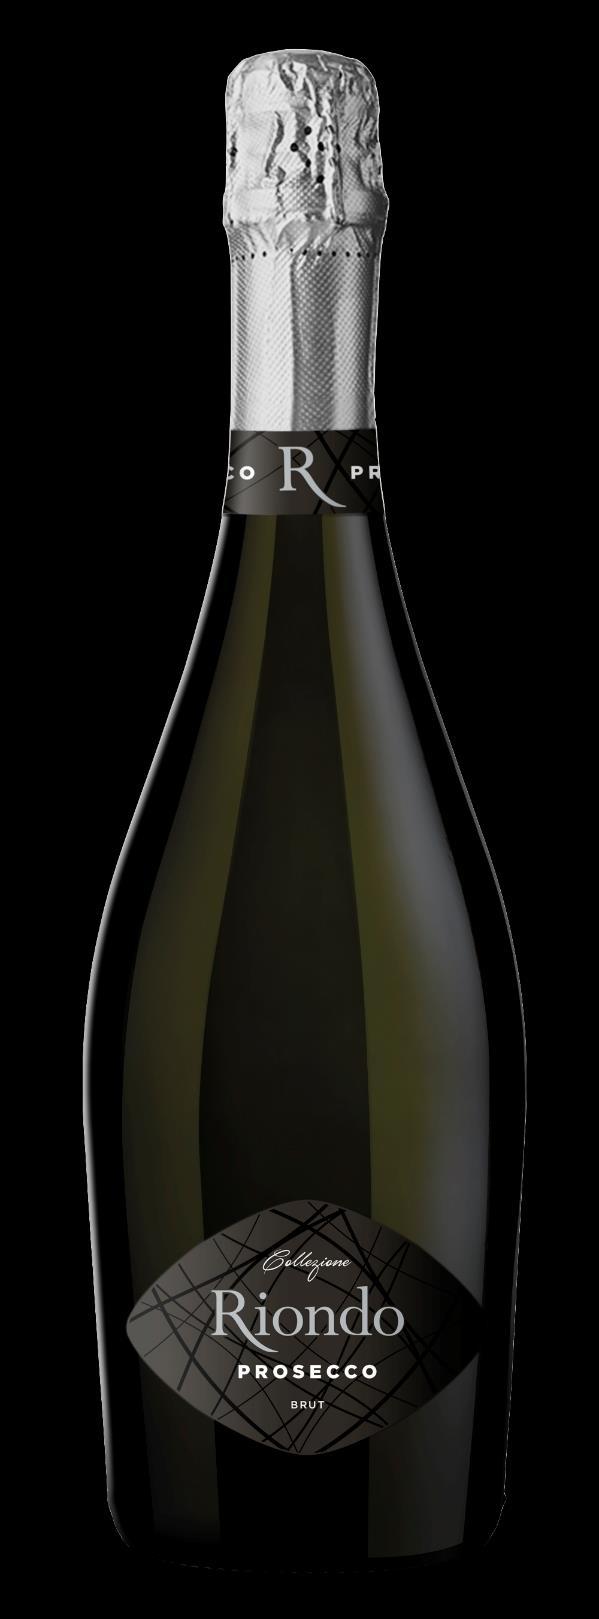 Collezione Prosecco Brut Sparkling, Brut Alcool 11% vol Residual Sugar 11 g/liter 6-8 C Cold maceration of the grapes, natural fermentation at a controlled temperature of 16, Sparkling fermentation